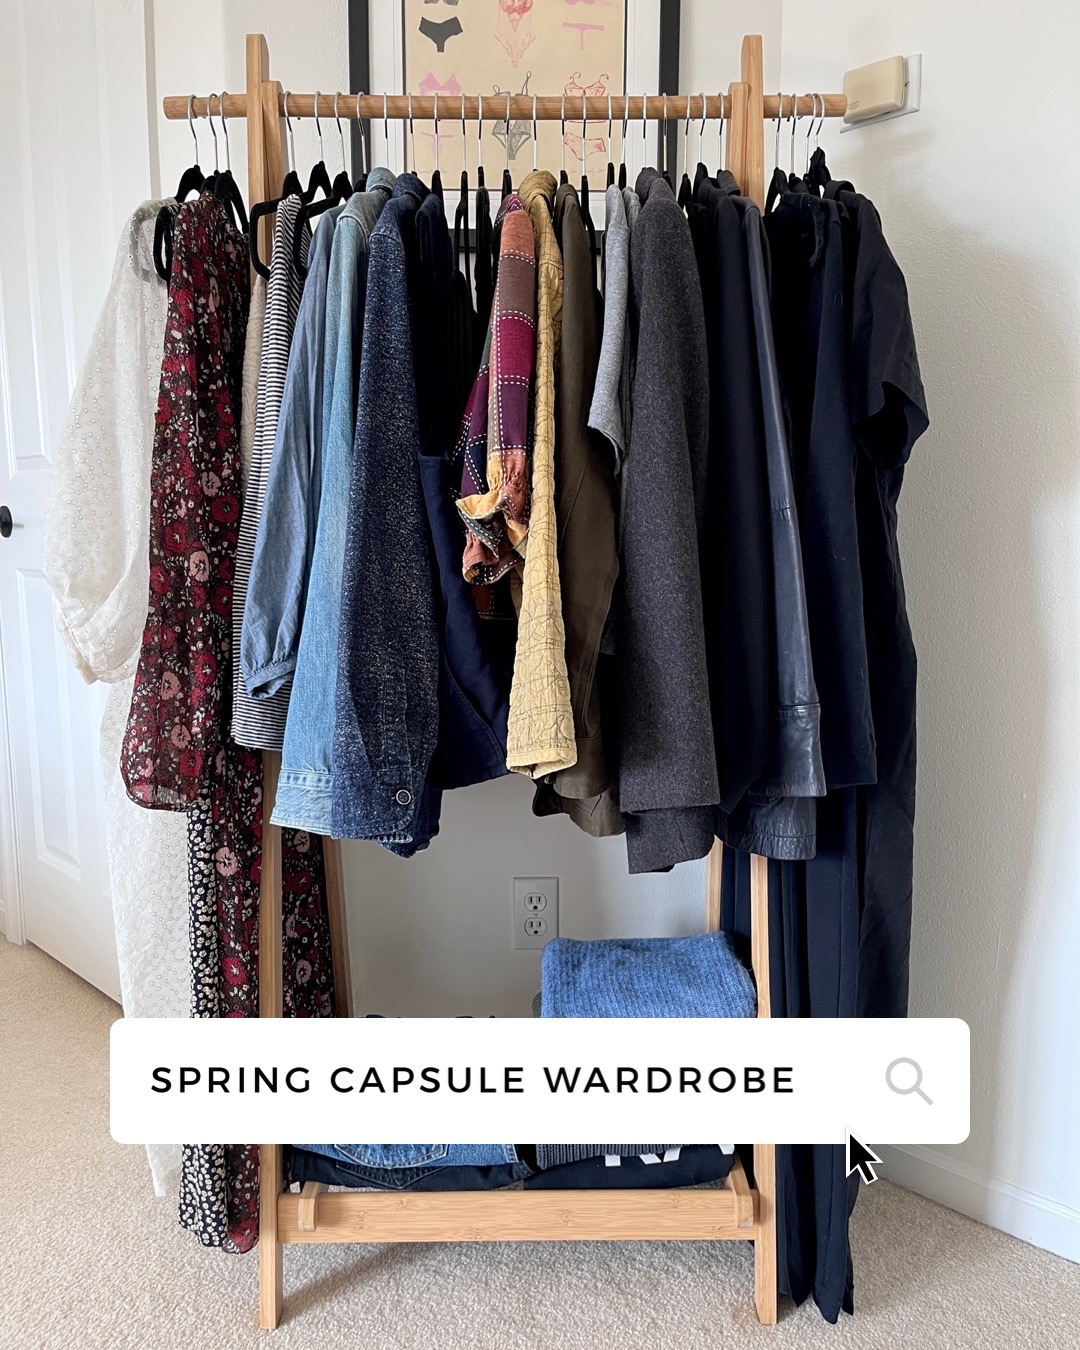 You are currently viewing Spring Capsule Wardrobe Part 2: What’s in it?